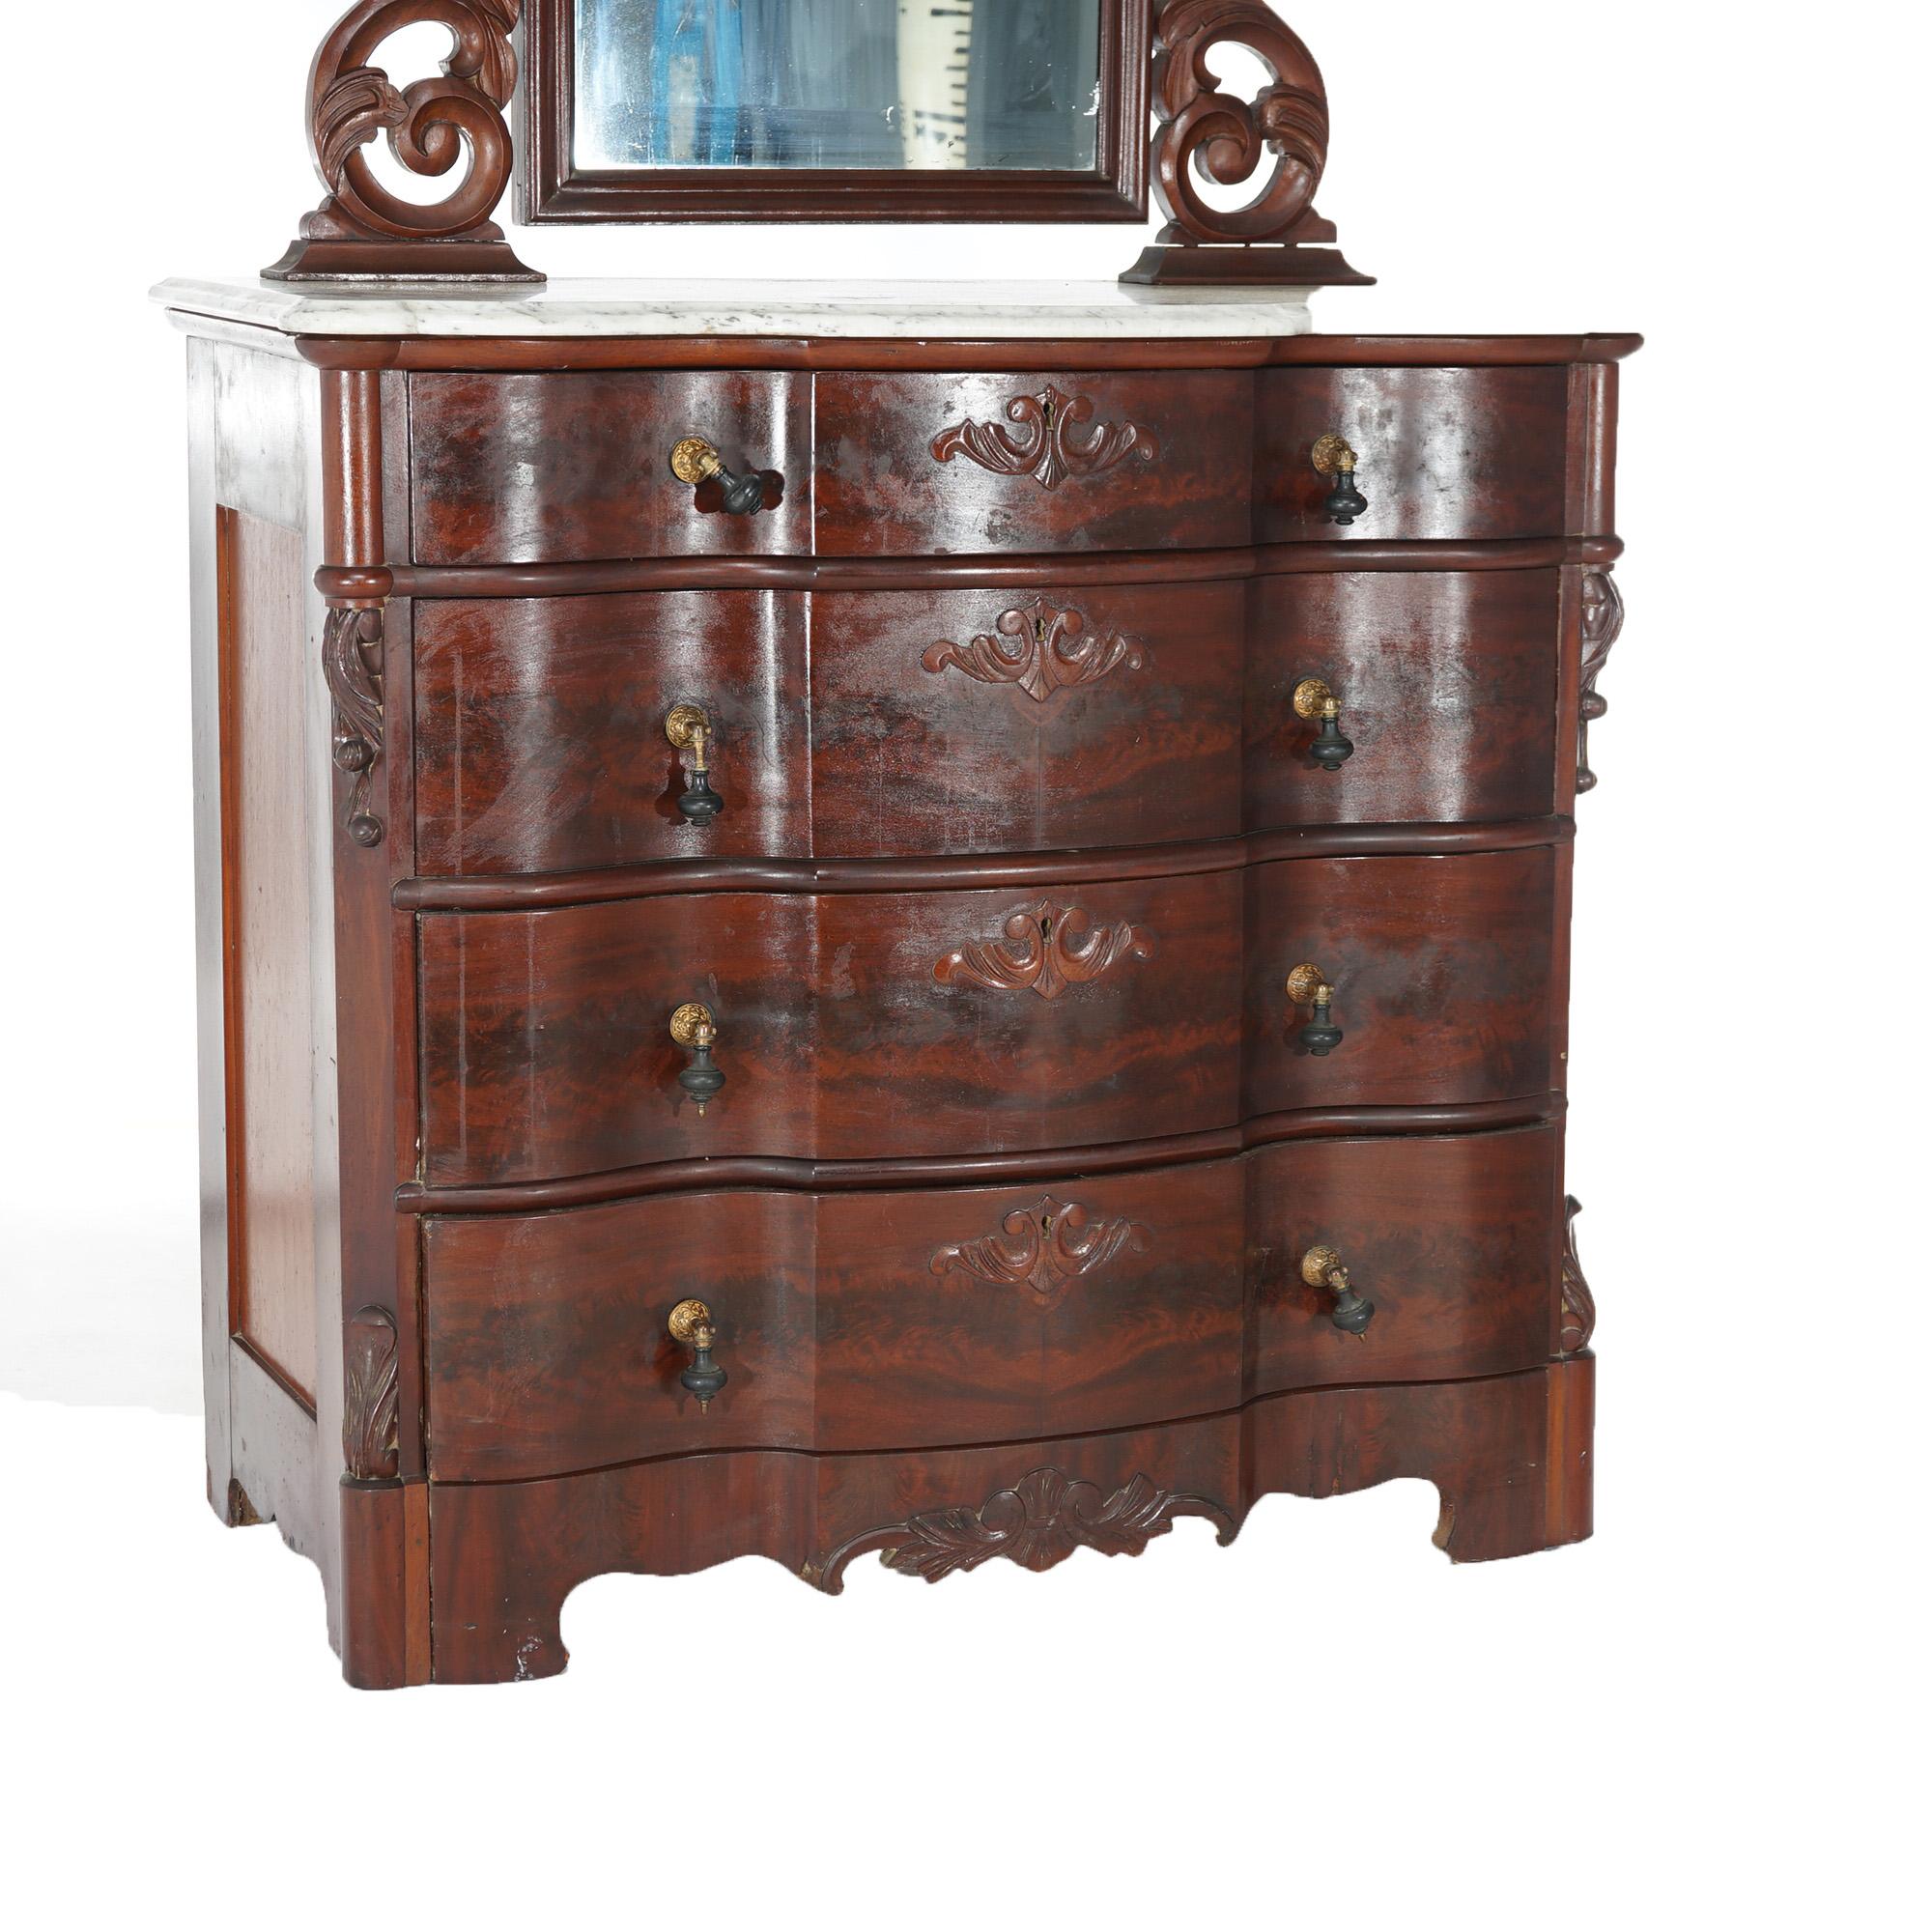 Antique Victorian Flame Mahogany Swell Front Mirrored Chest of Drawers c1860 For Sale 6